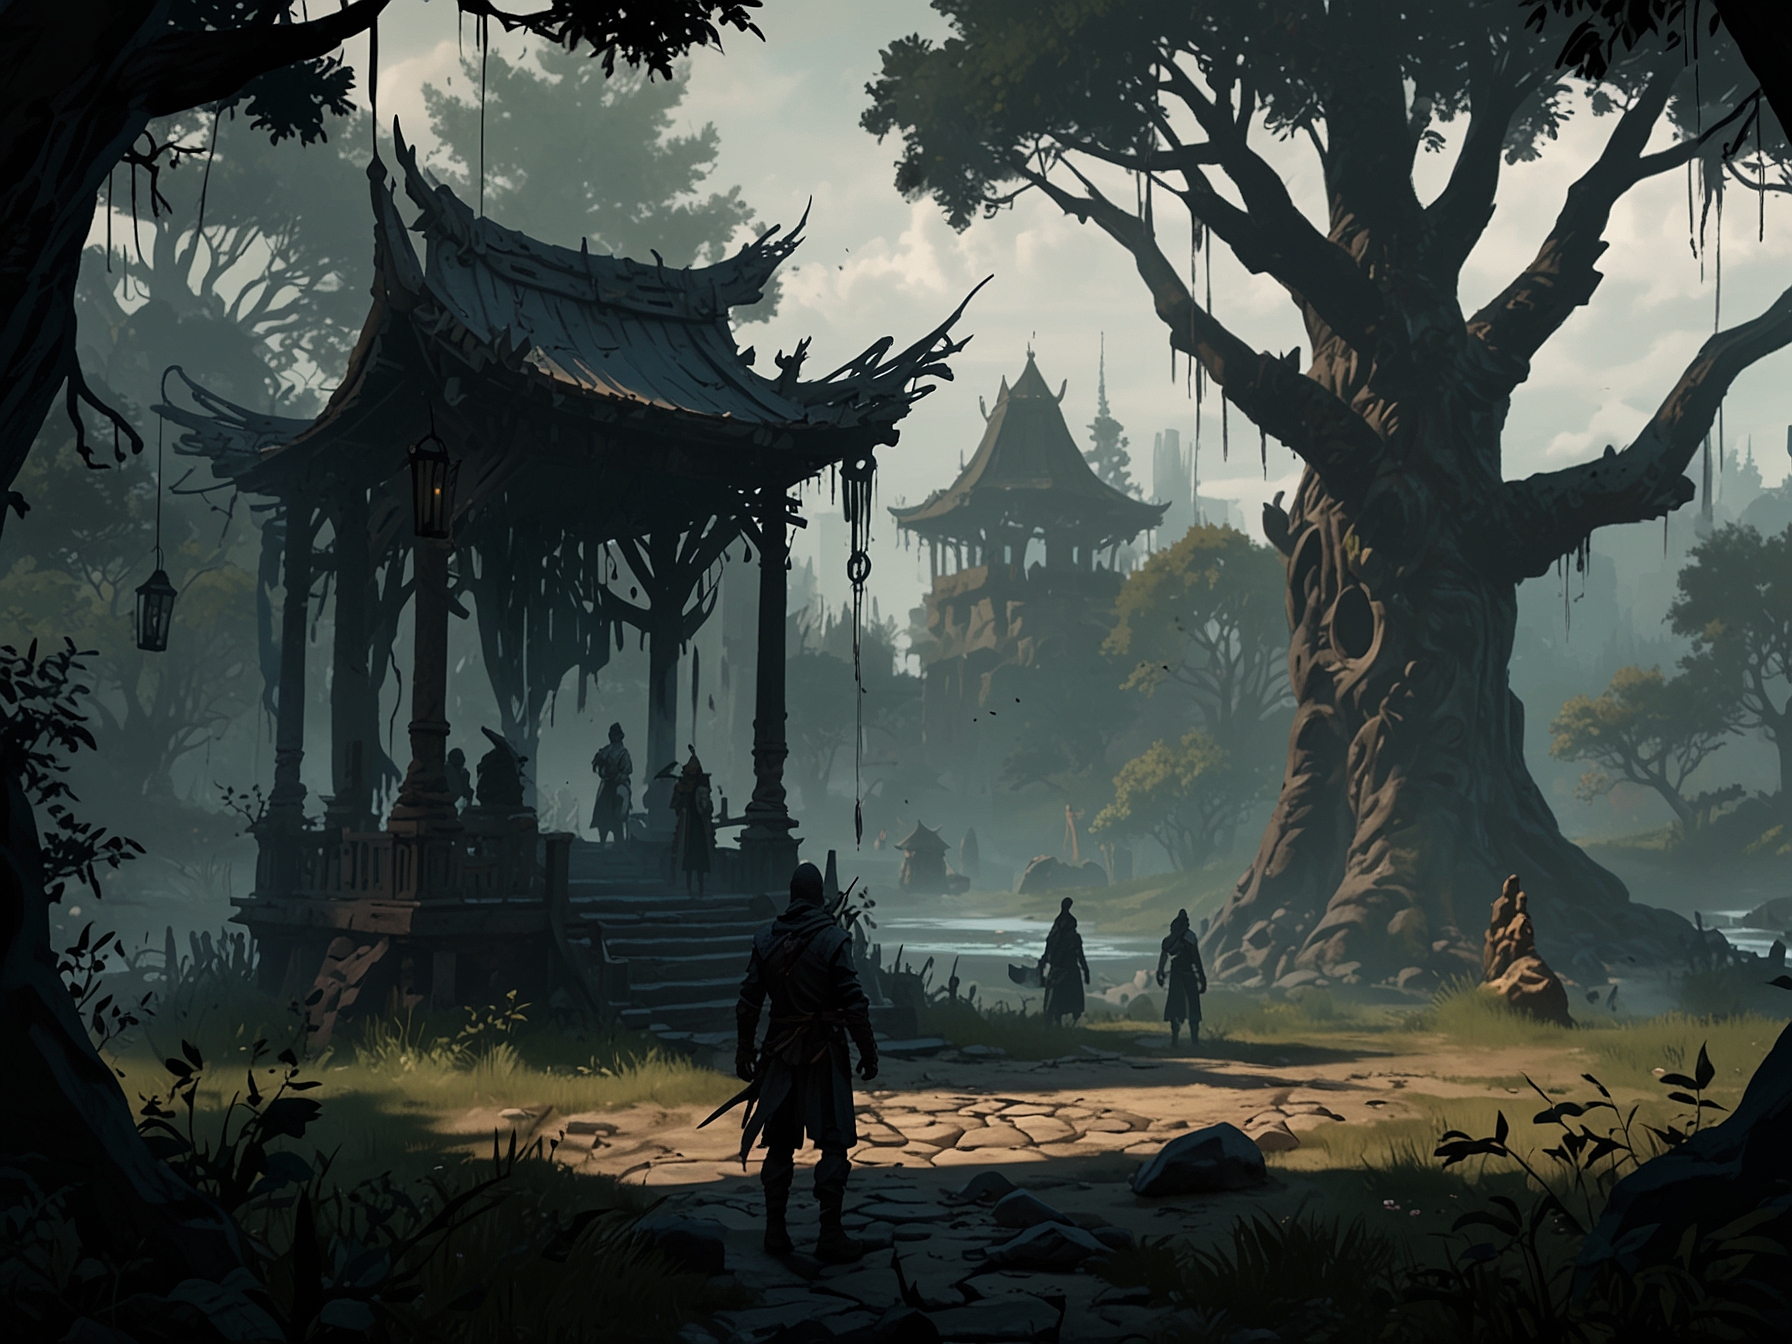 An in-game cutscene from Shadows of the Erdtree shows new characters and intricate lore. This scene illustrates the immersive world-building that fans have come to love.